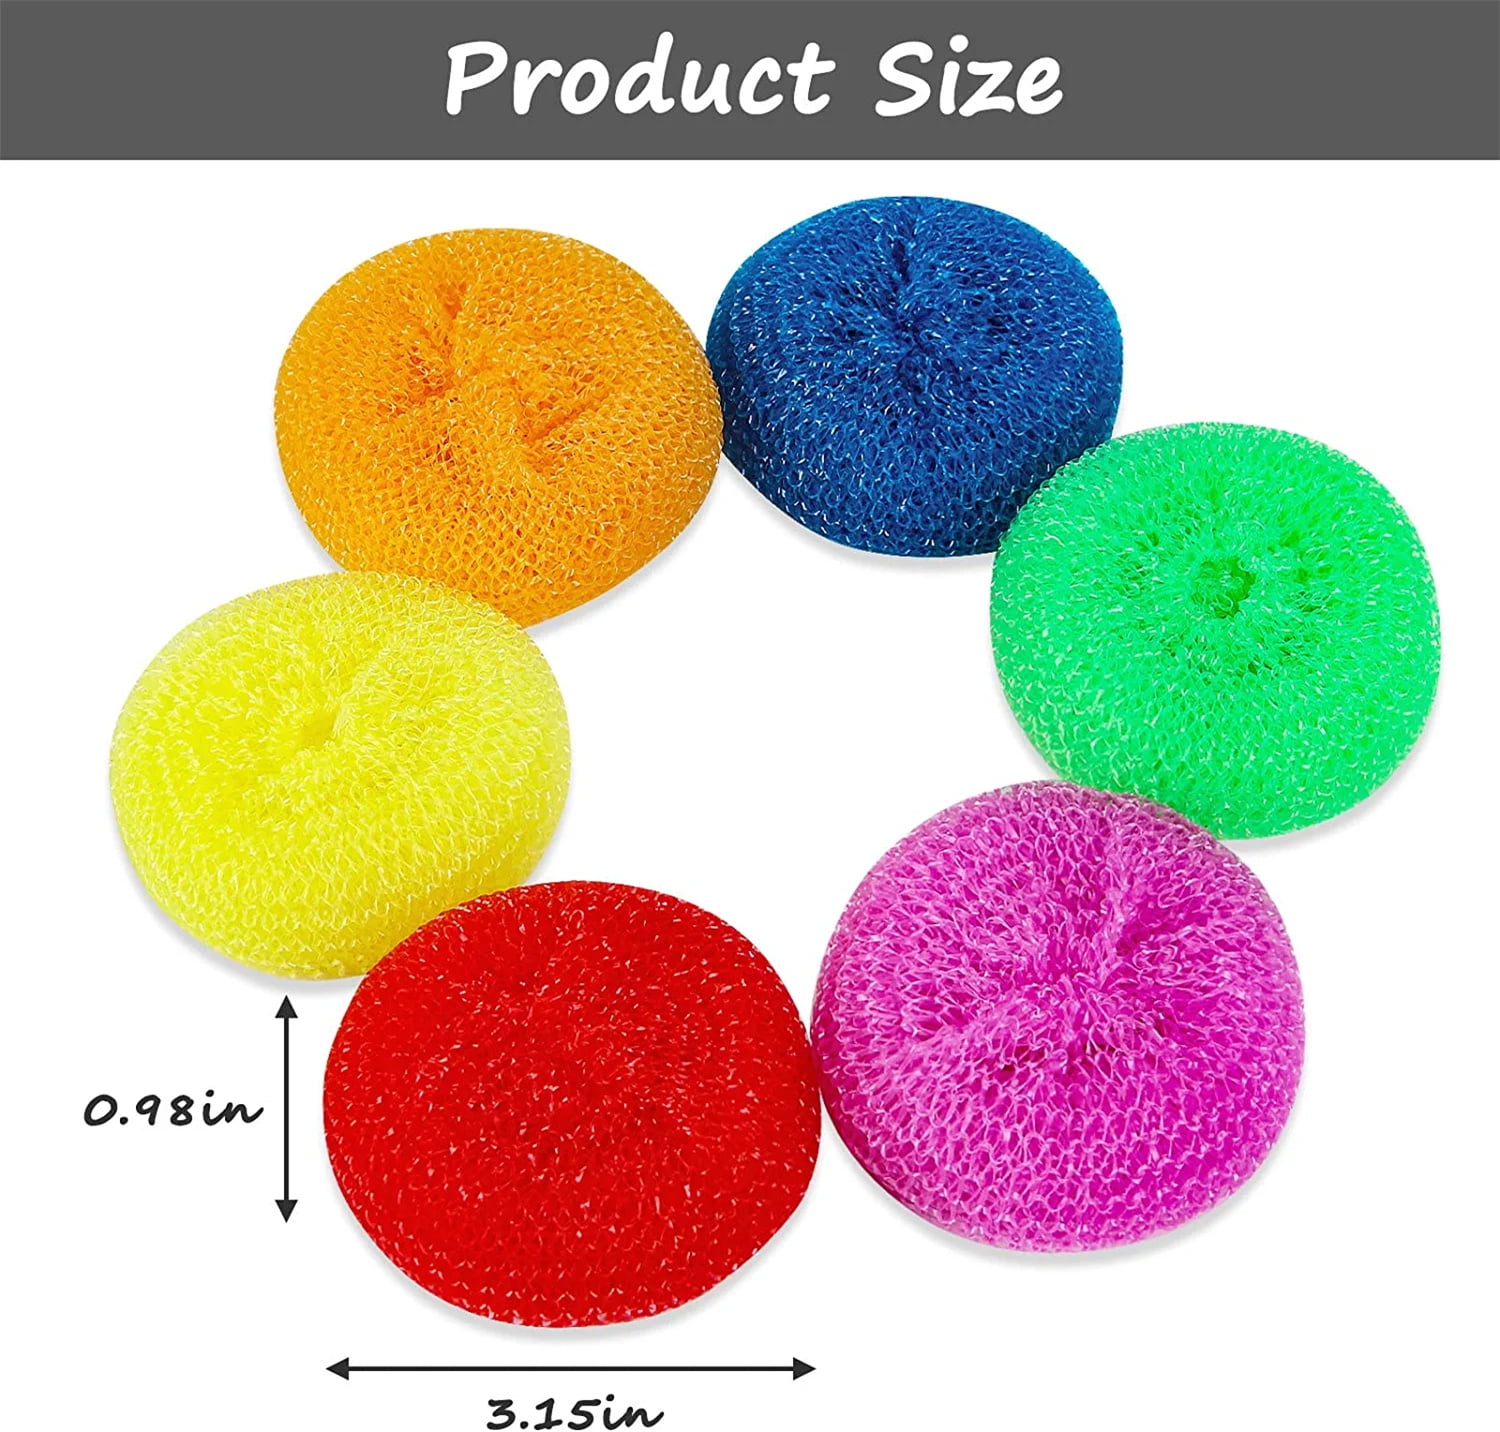 Handmade Nylon Kitchen Scrubbers - Pot Scrubbers - Bulk Buy Pack of 10 -  Sponge - Scouring Pad - Reusable - Scrubbies - double thickness - large